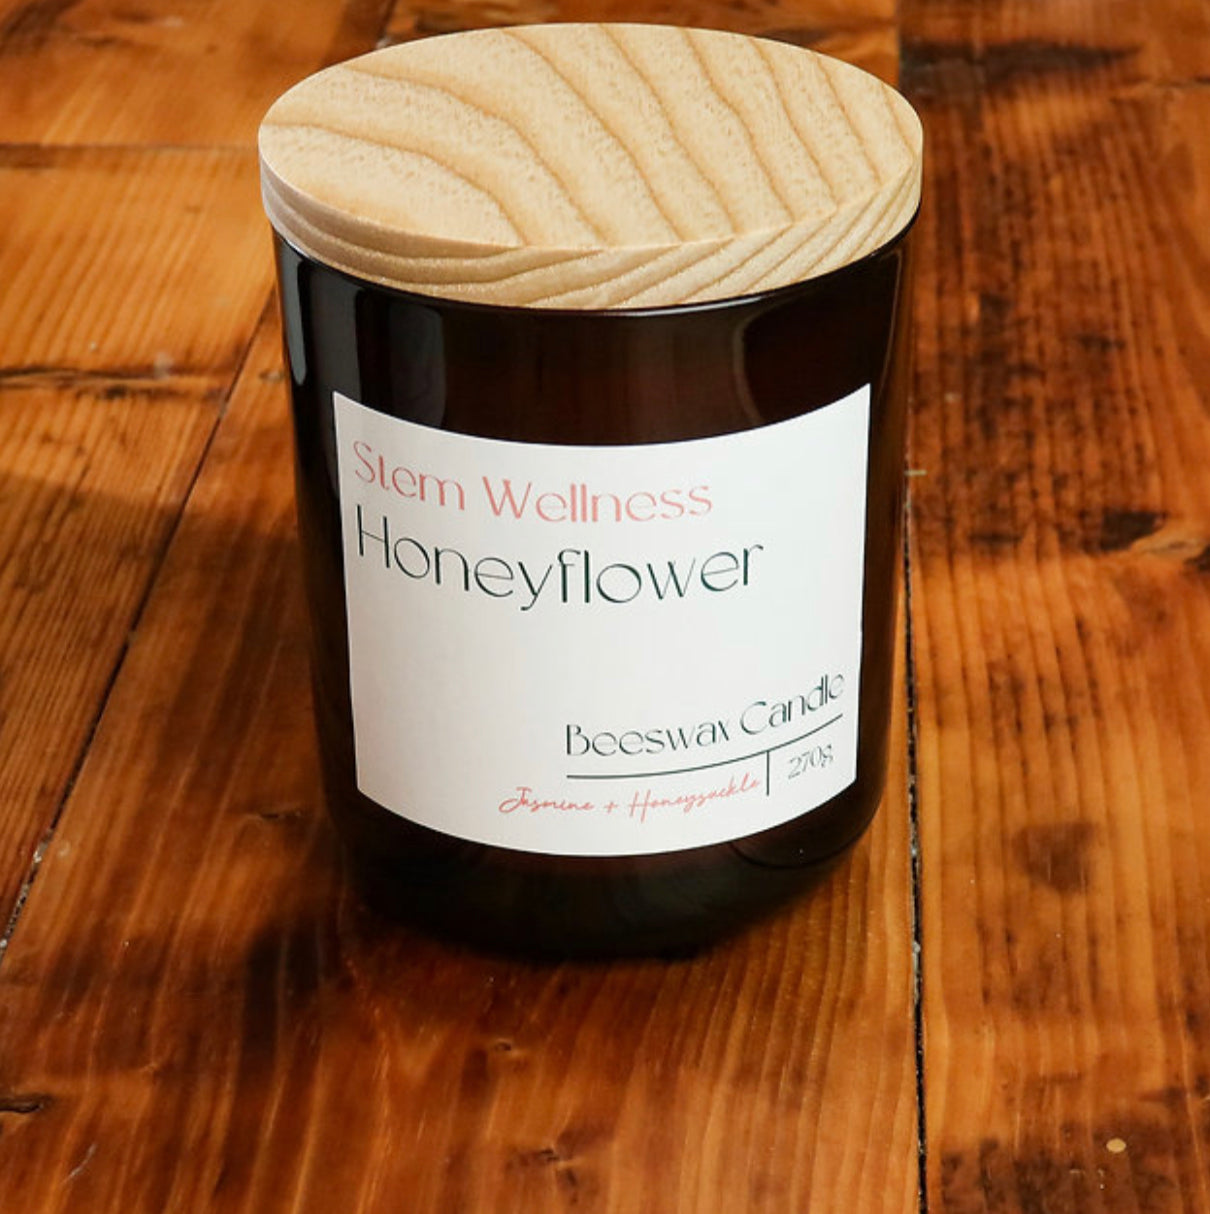 Honeyflower Beeswax Candle